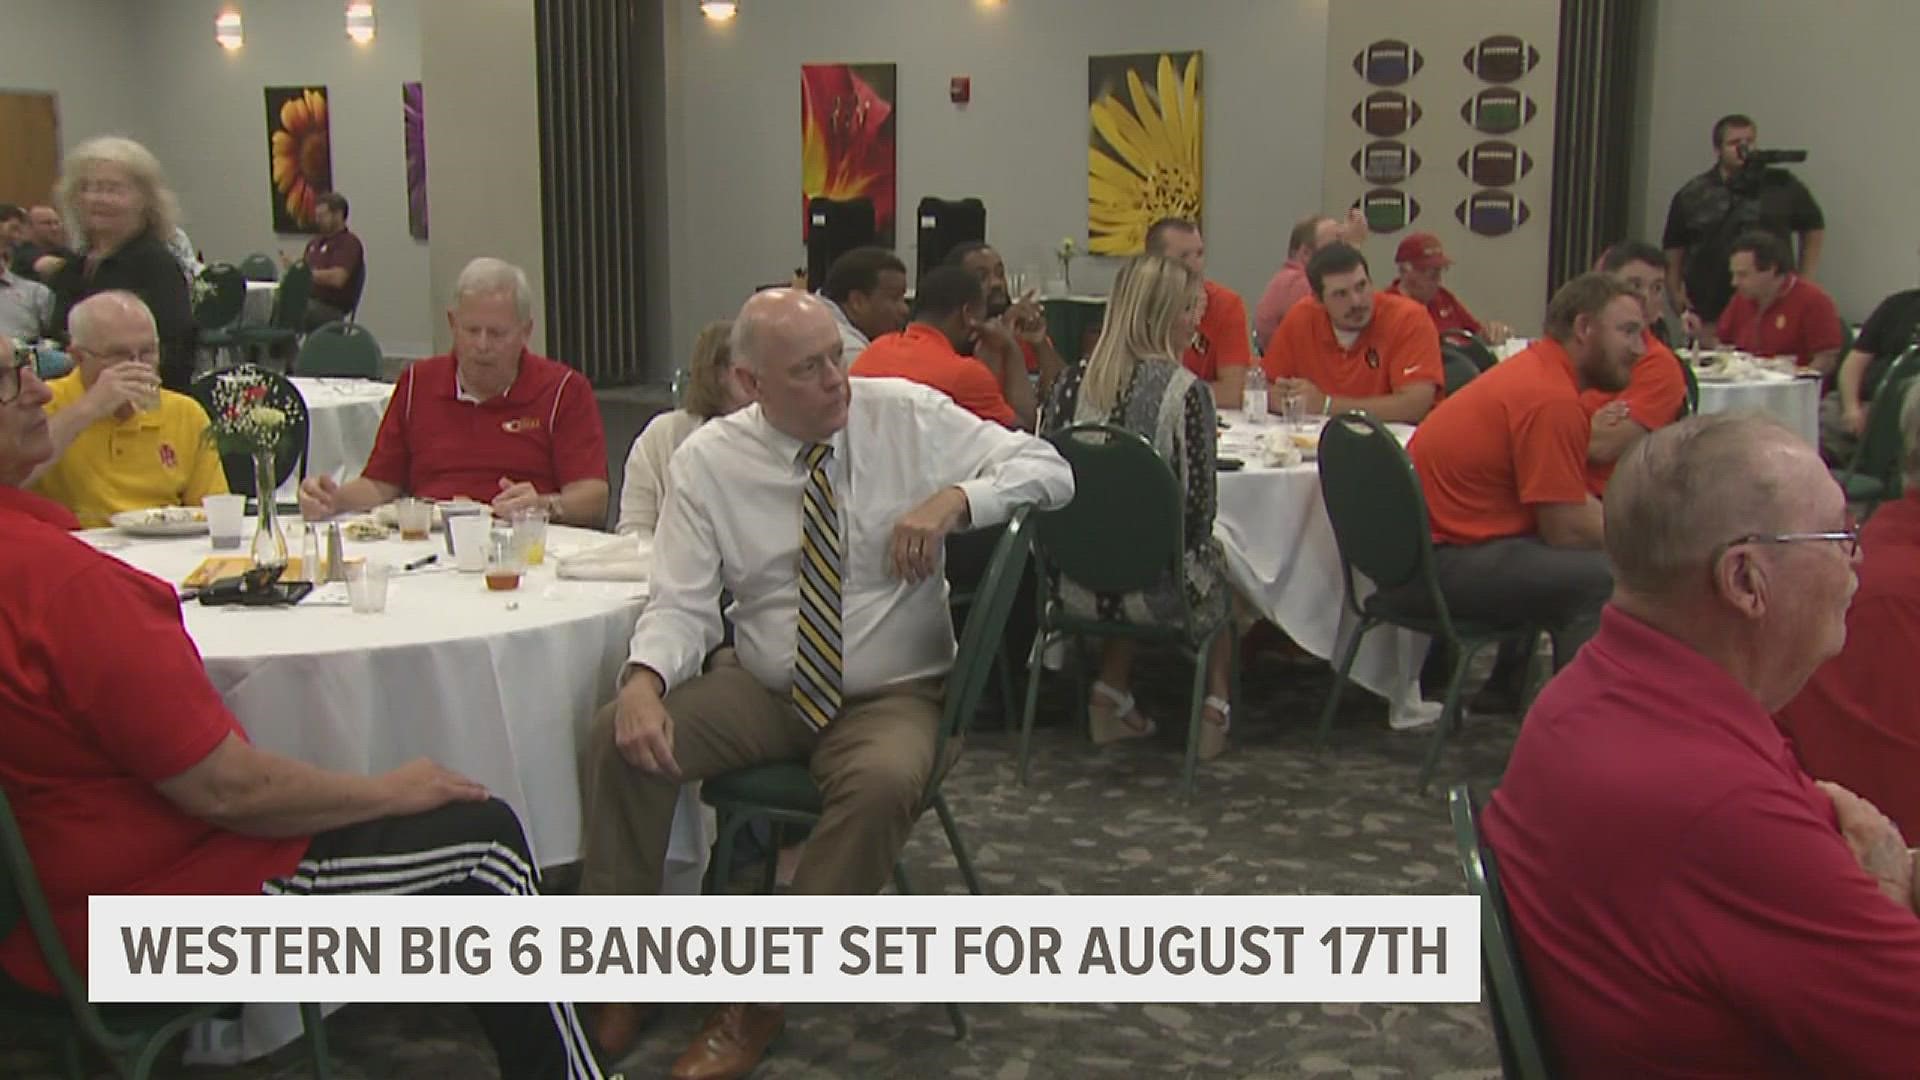 The banquet is being held at the Botanical Center in Rock Island, and organizers say they need community support.